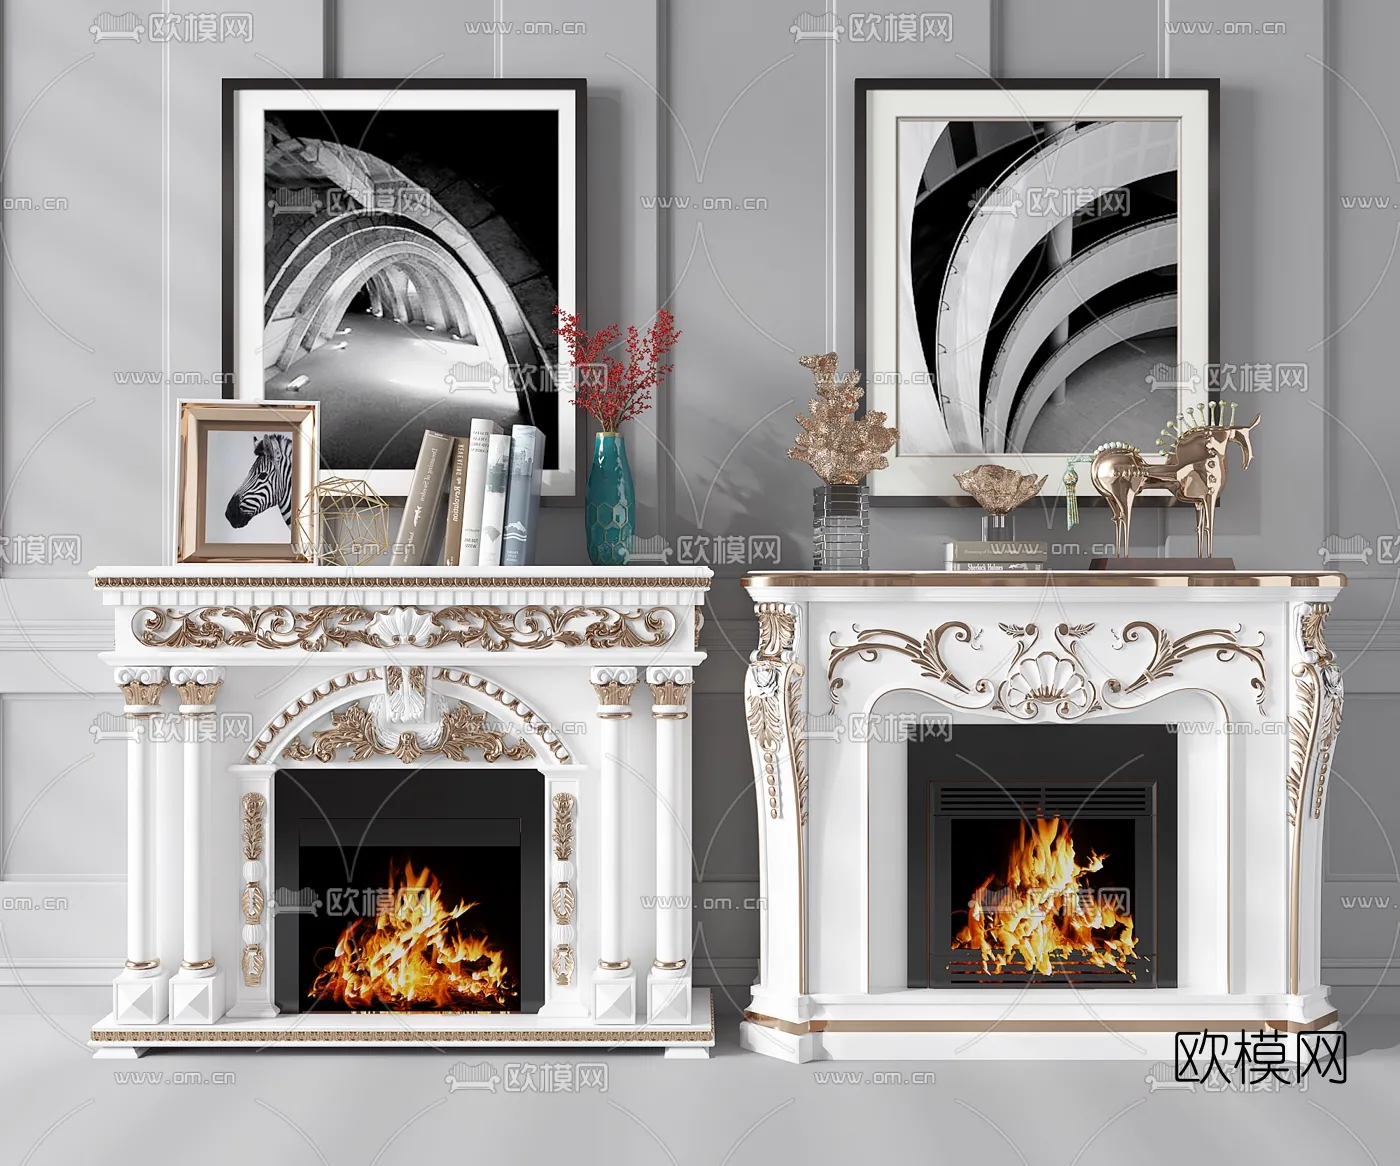 CLASSIC – FIREPLACE 3DMODELS – 054